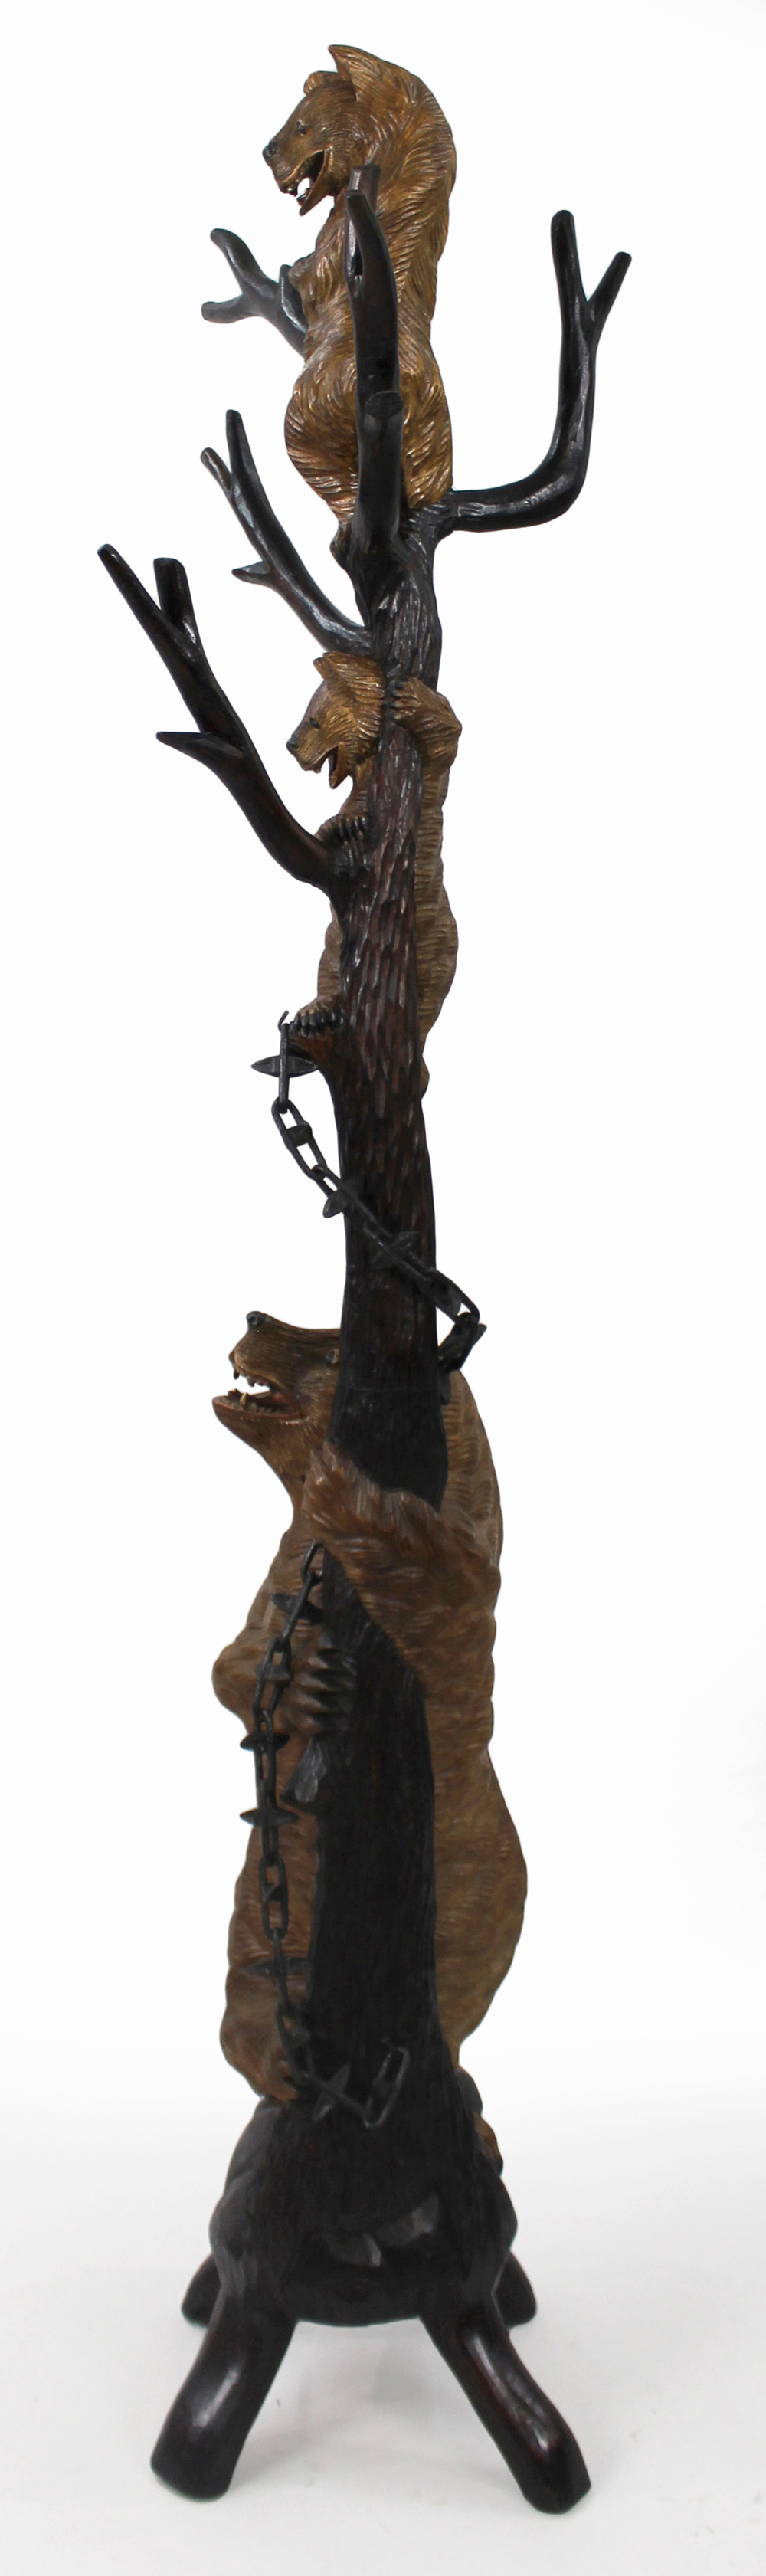 19th Century Black Forest Carved Bear Coat Stand - Image 4 of 12